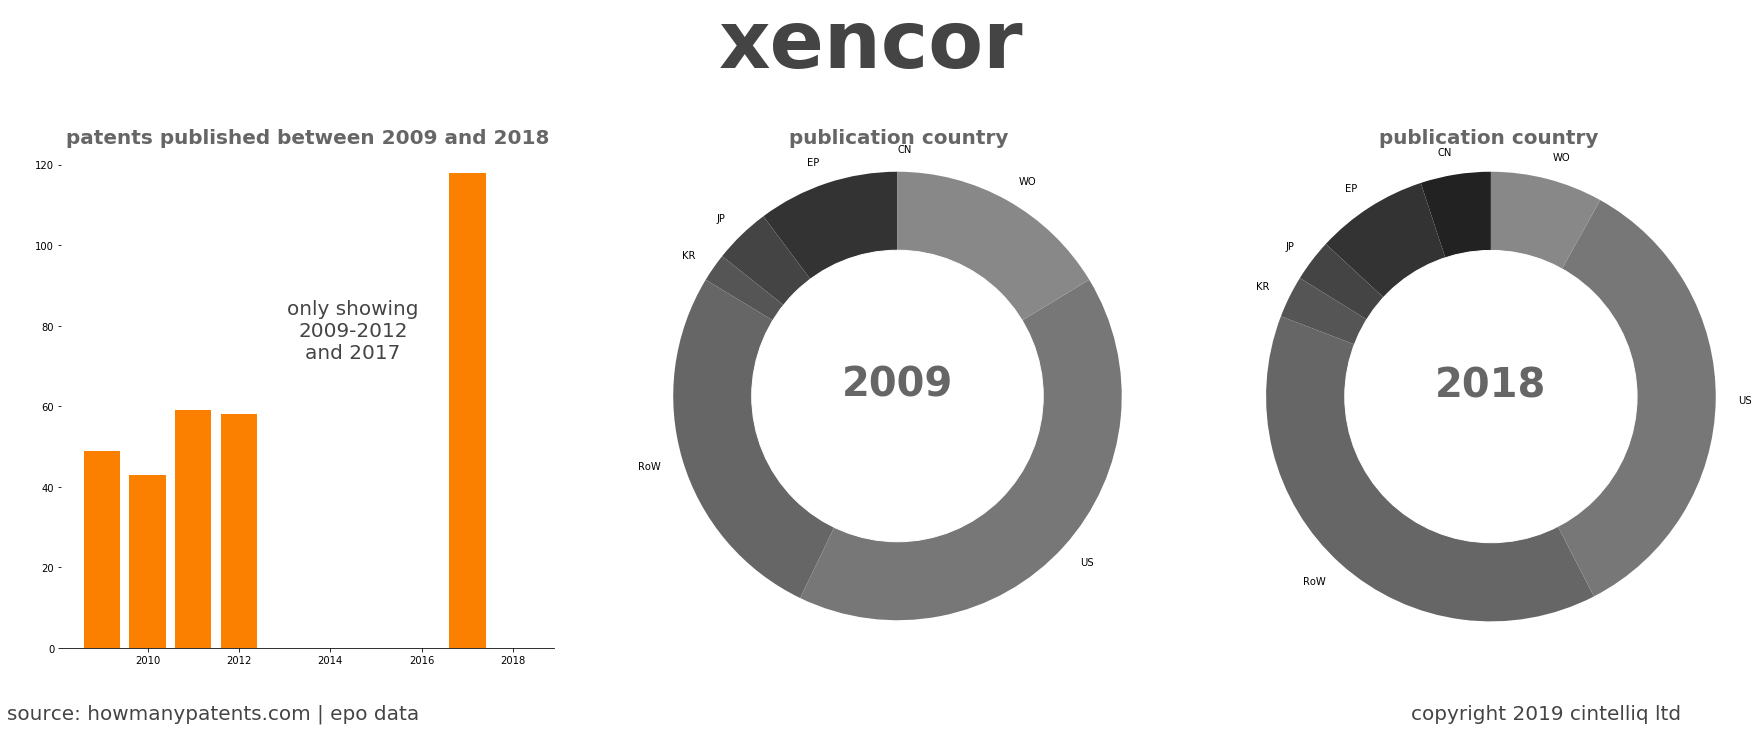 summary of patents for Xencor